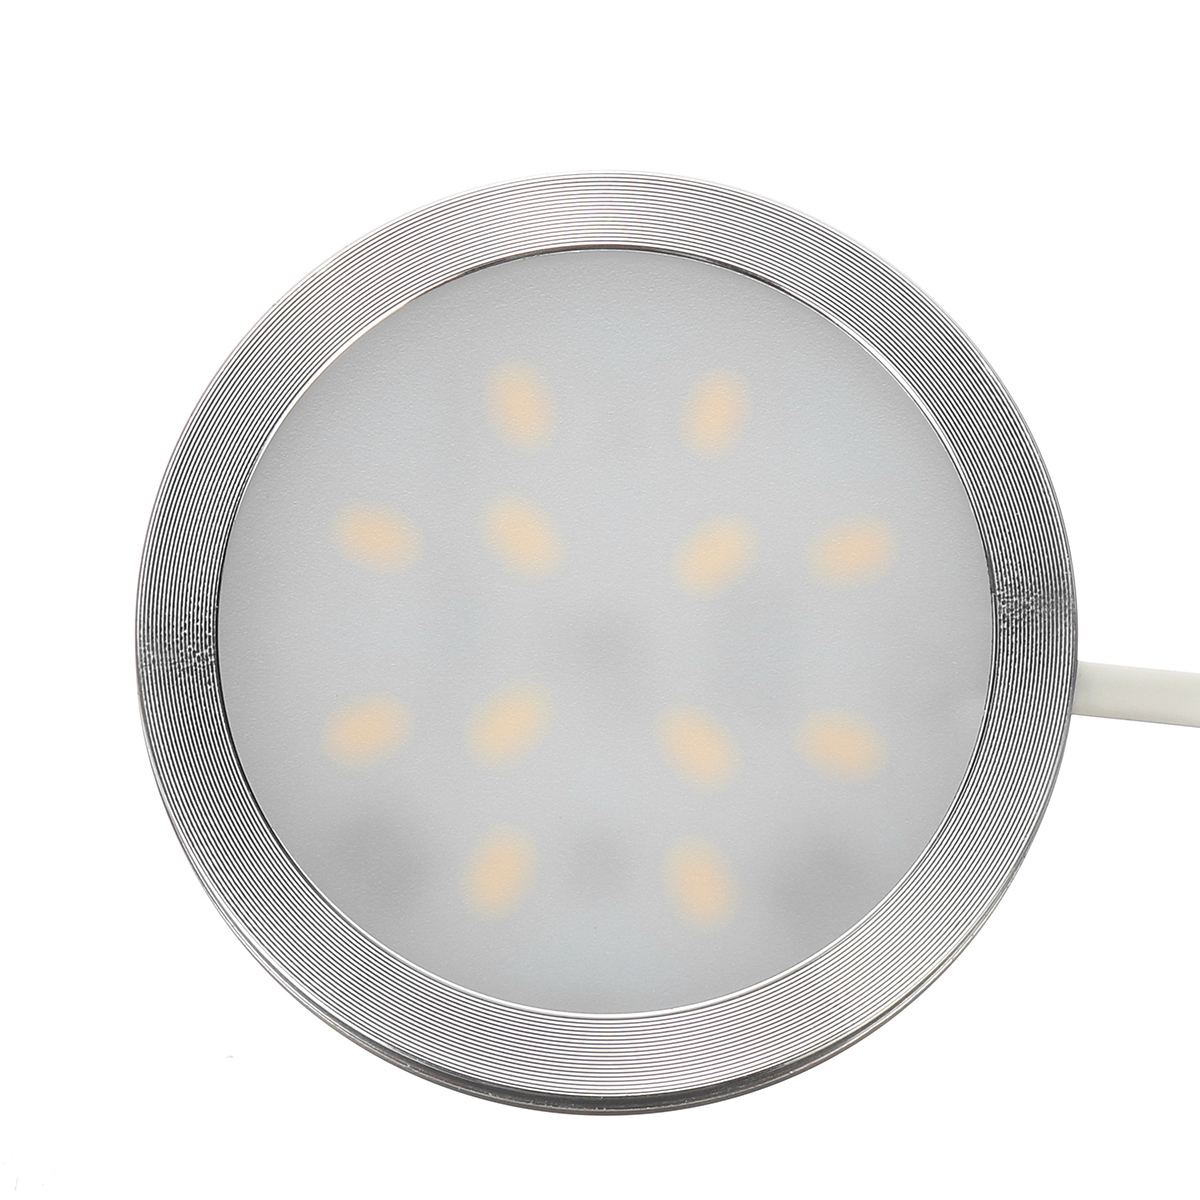 25W-6-In-1-LED-Under-Cabinet-Light-Ceiling-Panel-Down-Slim-Kitchen-Cupboard-Recessed-Lamp-DC12V-1705748-8